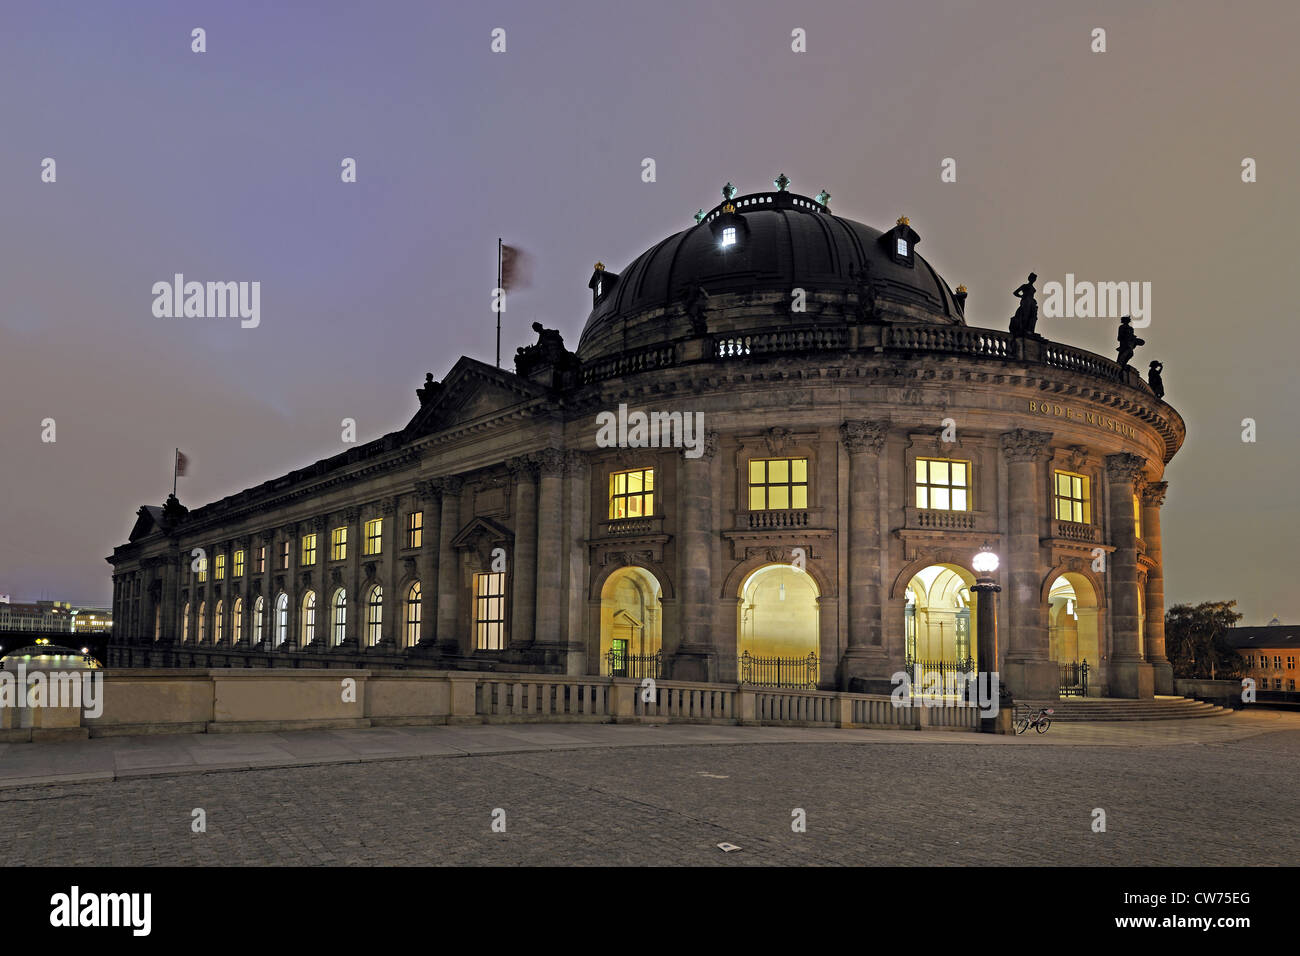 Bode museum on the museum island at night, Germany, Berlin Stock Photo